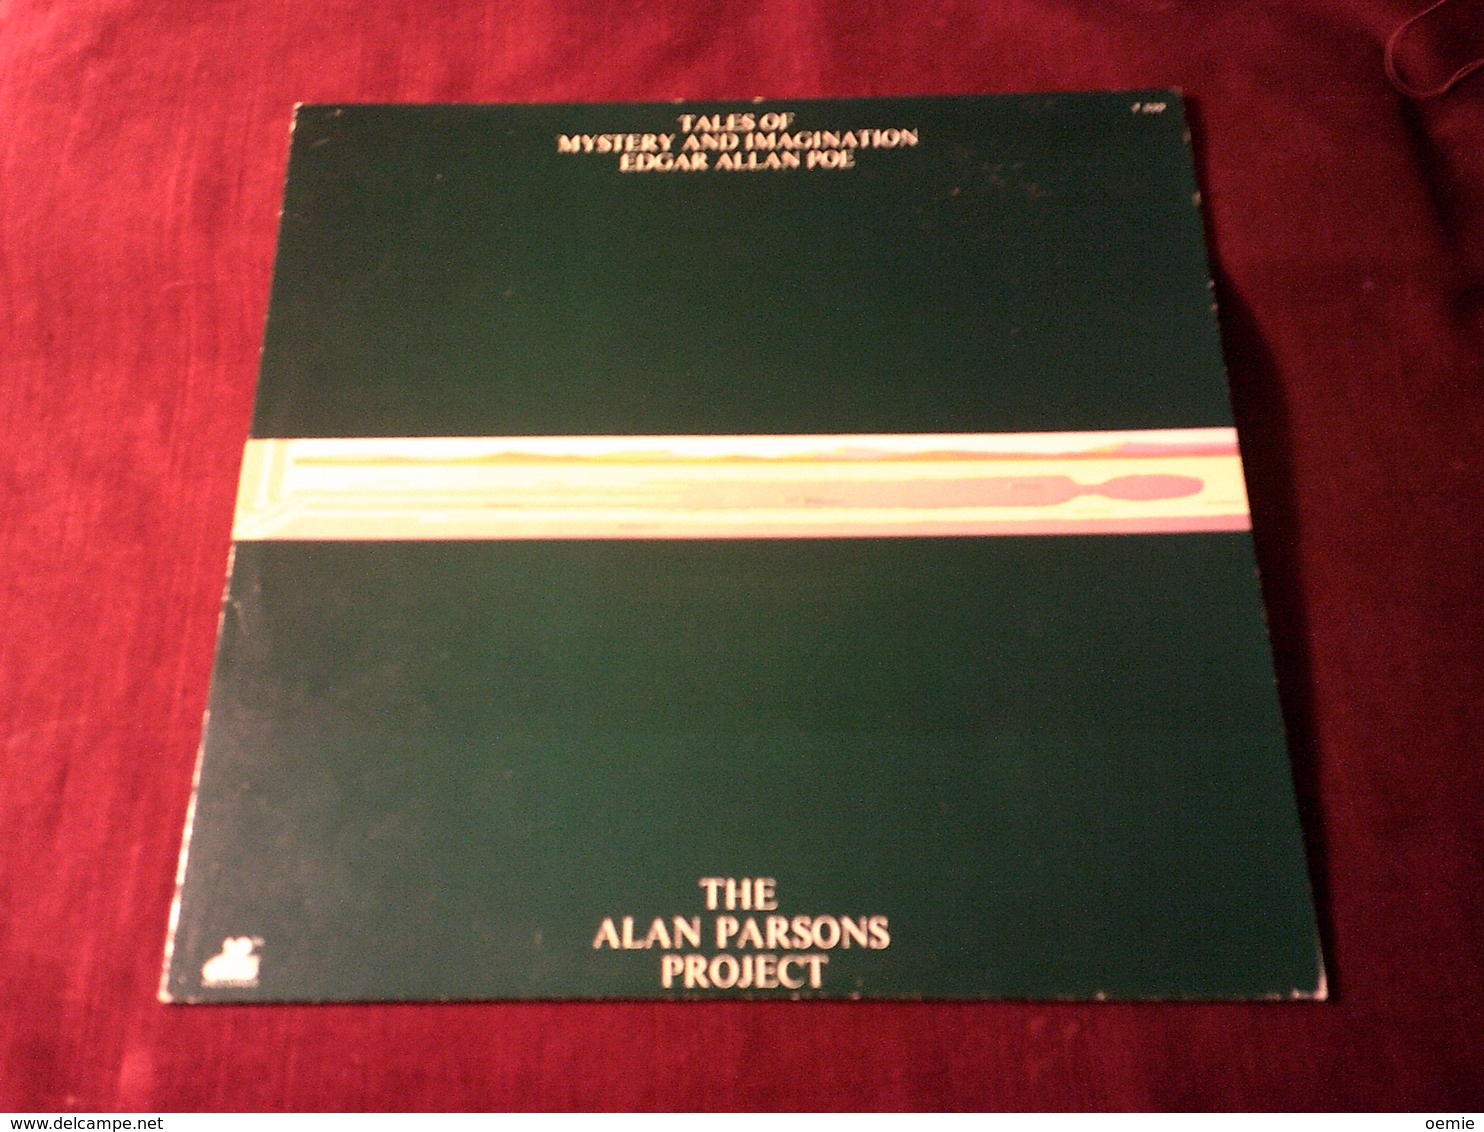 THE ALAN PARSONS PROJECT  ° TALES OF MYSTER AND IMAGINATION EDGAR ALLAN POE - Other - English Music